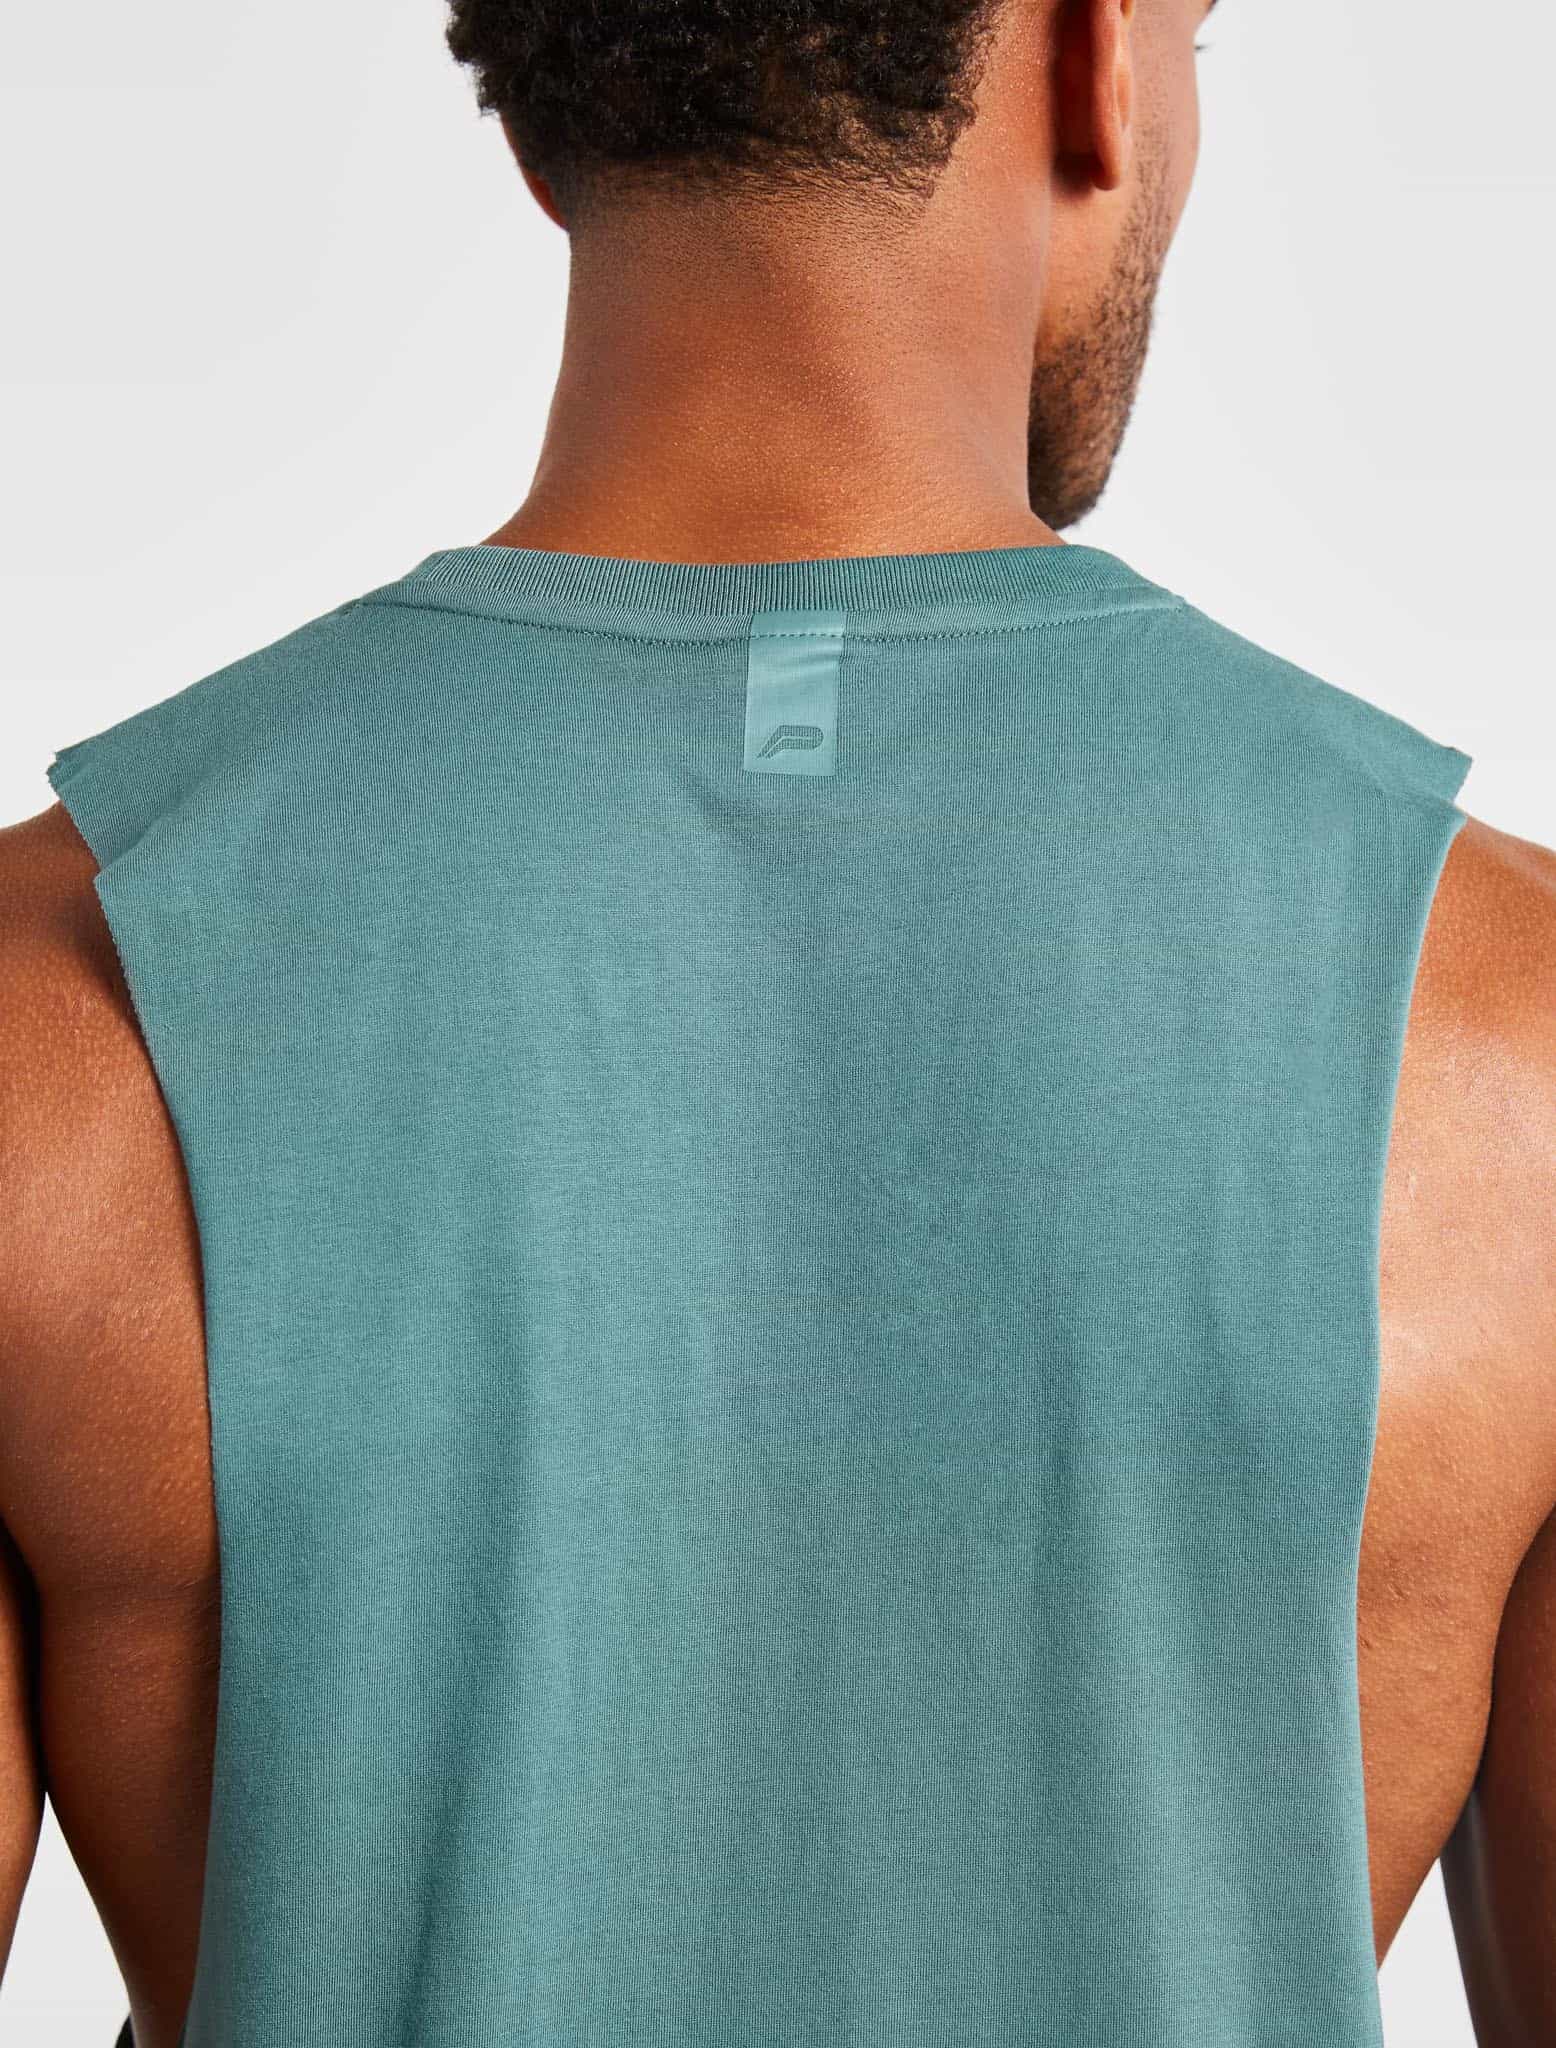 Icon Drop Arm Tank / Teal Pursue Fitness 3